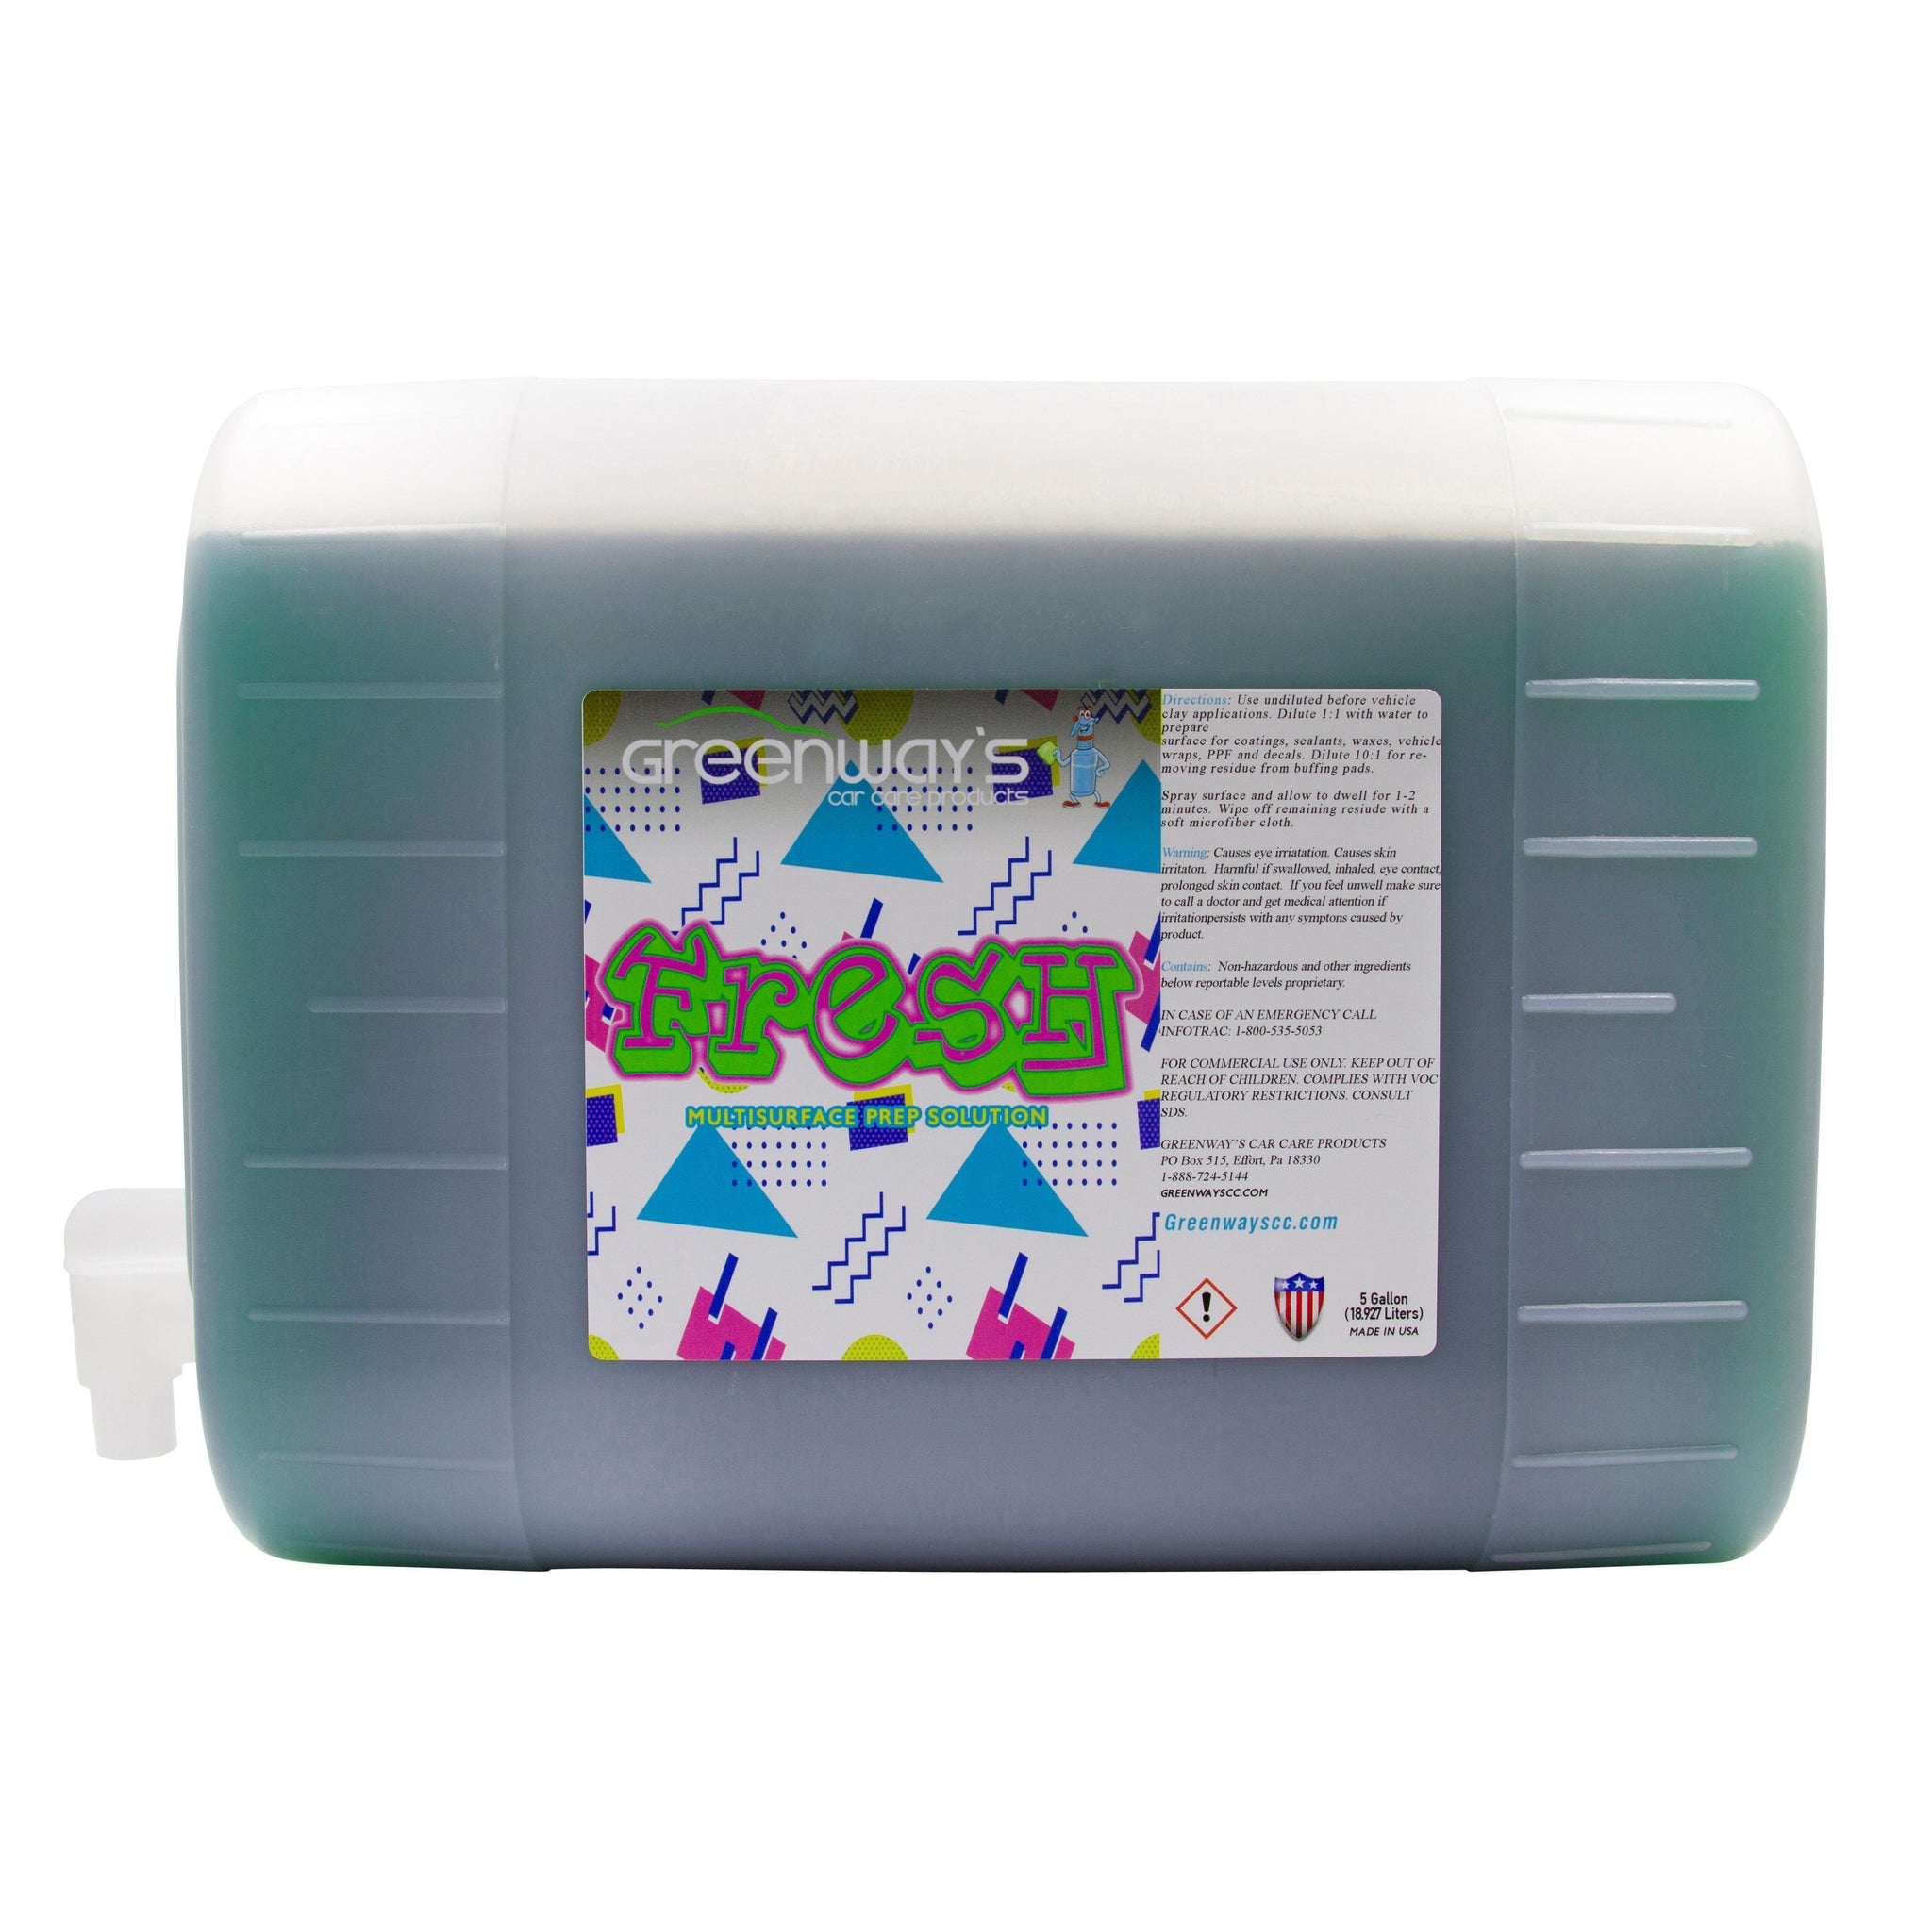 Greenway’s Fresh, car paint preparation, multi-surface cleaning solution, buffing pad cleaner, custom scented, 5 gallons.